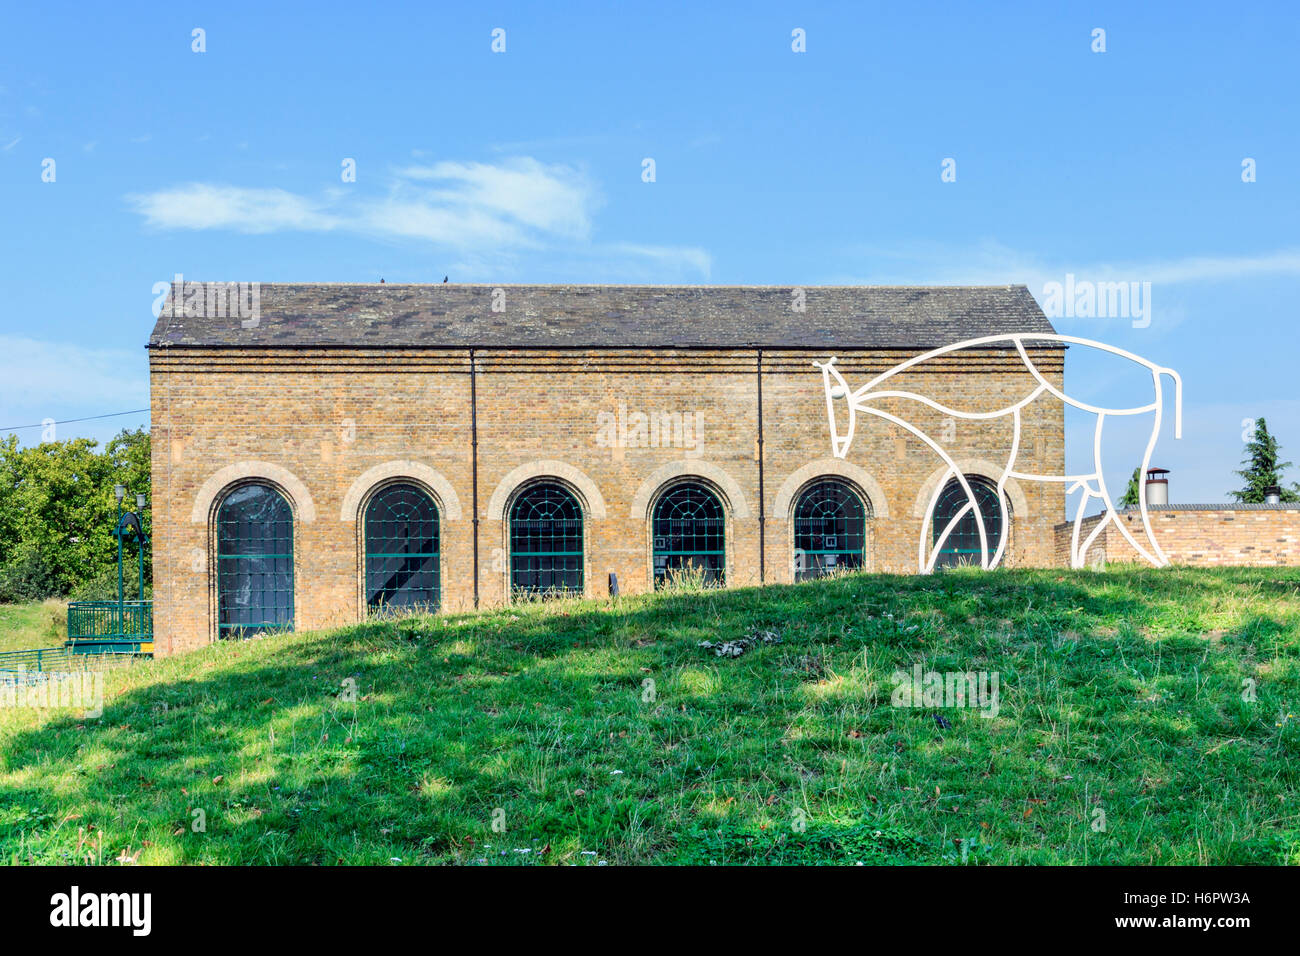 The Pumping Station in Markfield Park, Tottenham, North London, UK, a metal sculpture of a bull or cow (by Jack Gardner) on the right. Stock Photo